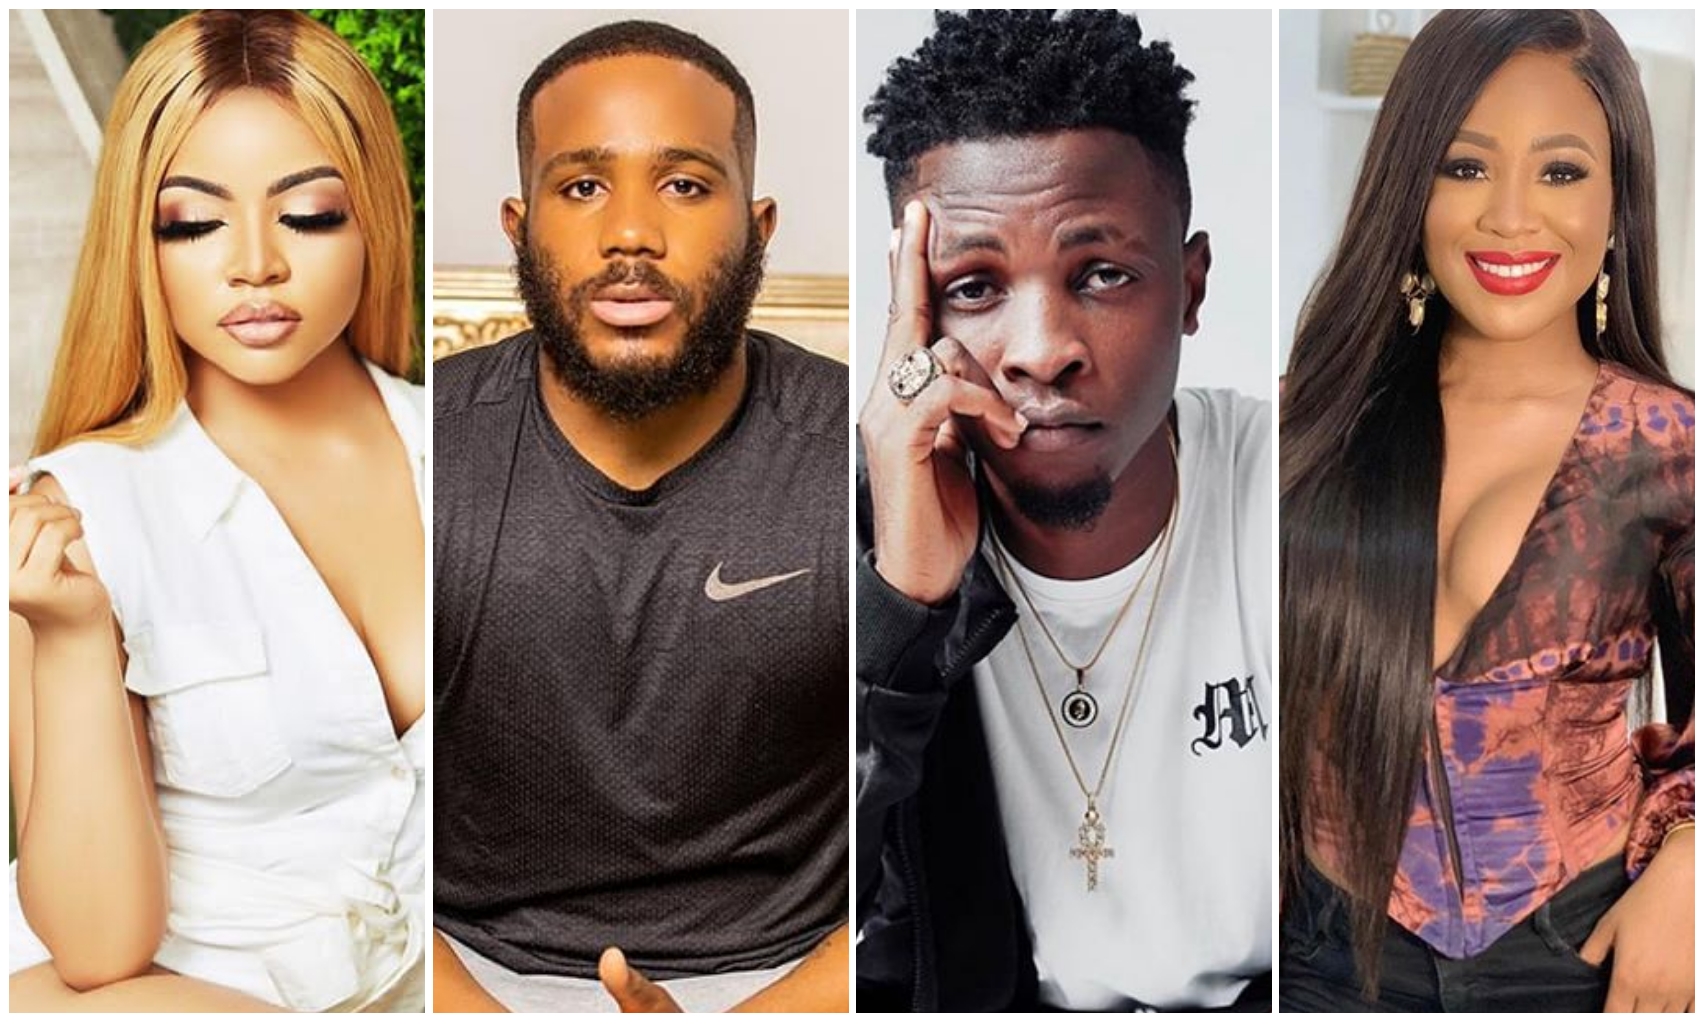 #BBNaija: Five Housemates that might make the finals and end up winning